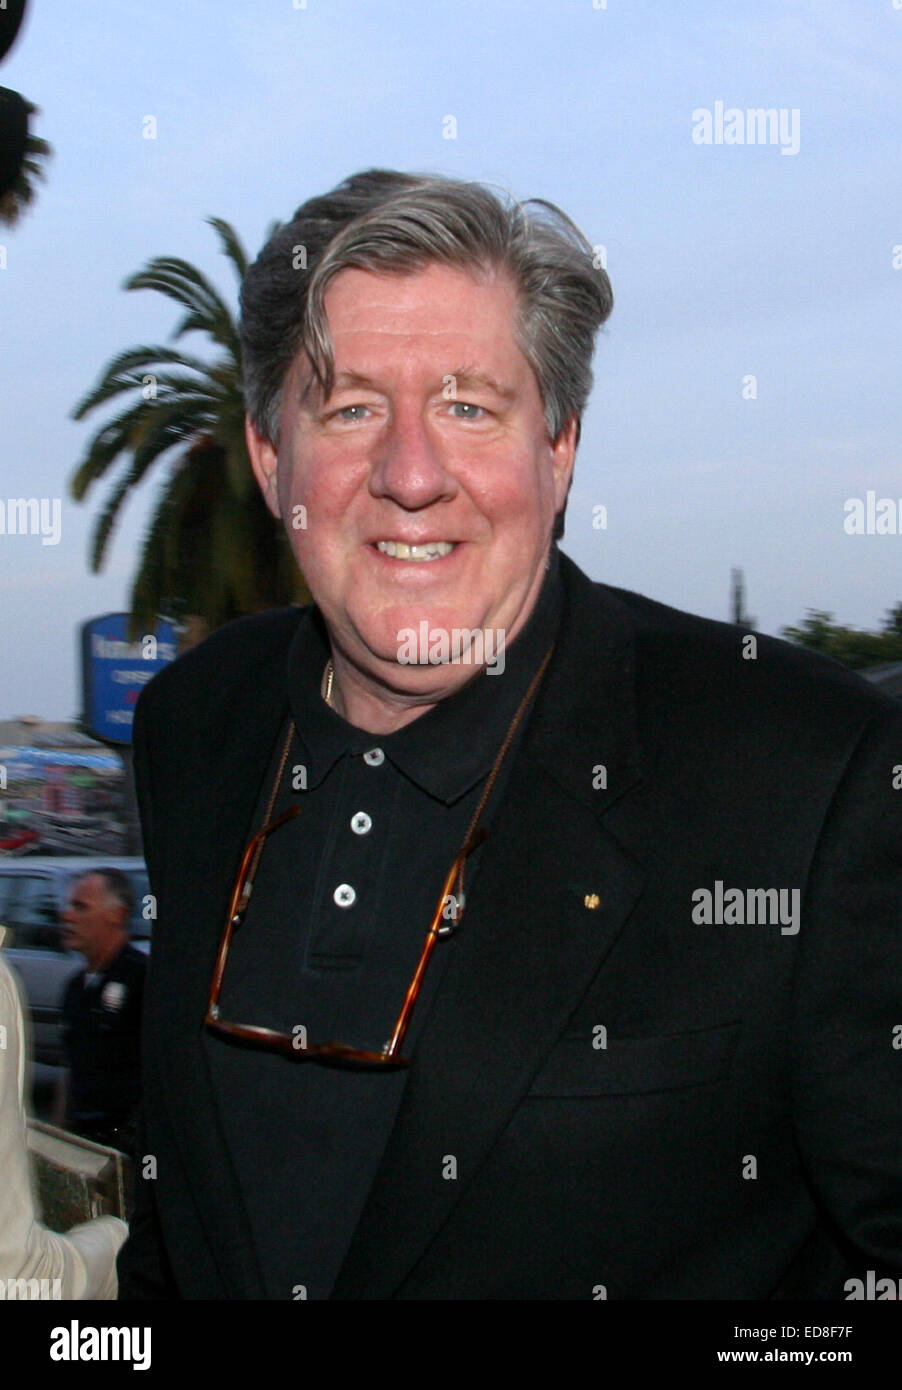 December 31, 2014 - File - EDWARD HERRMANN (July 21, 1943 - December 31, 2014) was an American actor, director, writer, and comedian, best known for his Emmy-nominated portrayals of Franklin D. Roosevelt on television, Richard Gilmore in Gilmore Girls, a ubiquitous narrator for historical programs on The History Channel and in such PBS productions as Nova, and as a spokesman for Dodge automobiles in the 1990s. Pictured - Apr 10, 2002 - Los Angeles, California, U.S. - Actor Edward Herrmann at the premiere of 'The Cat's Meow.' (Credit Image: Robert Millard/ZUMA Wire) Stock Photo